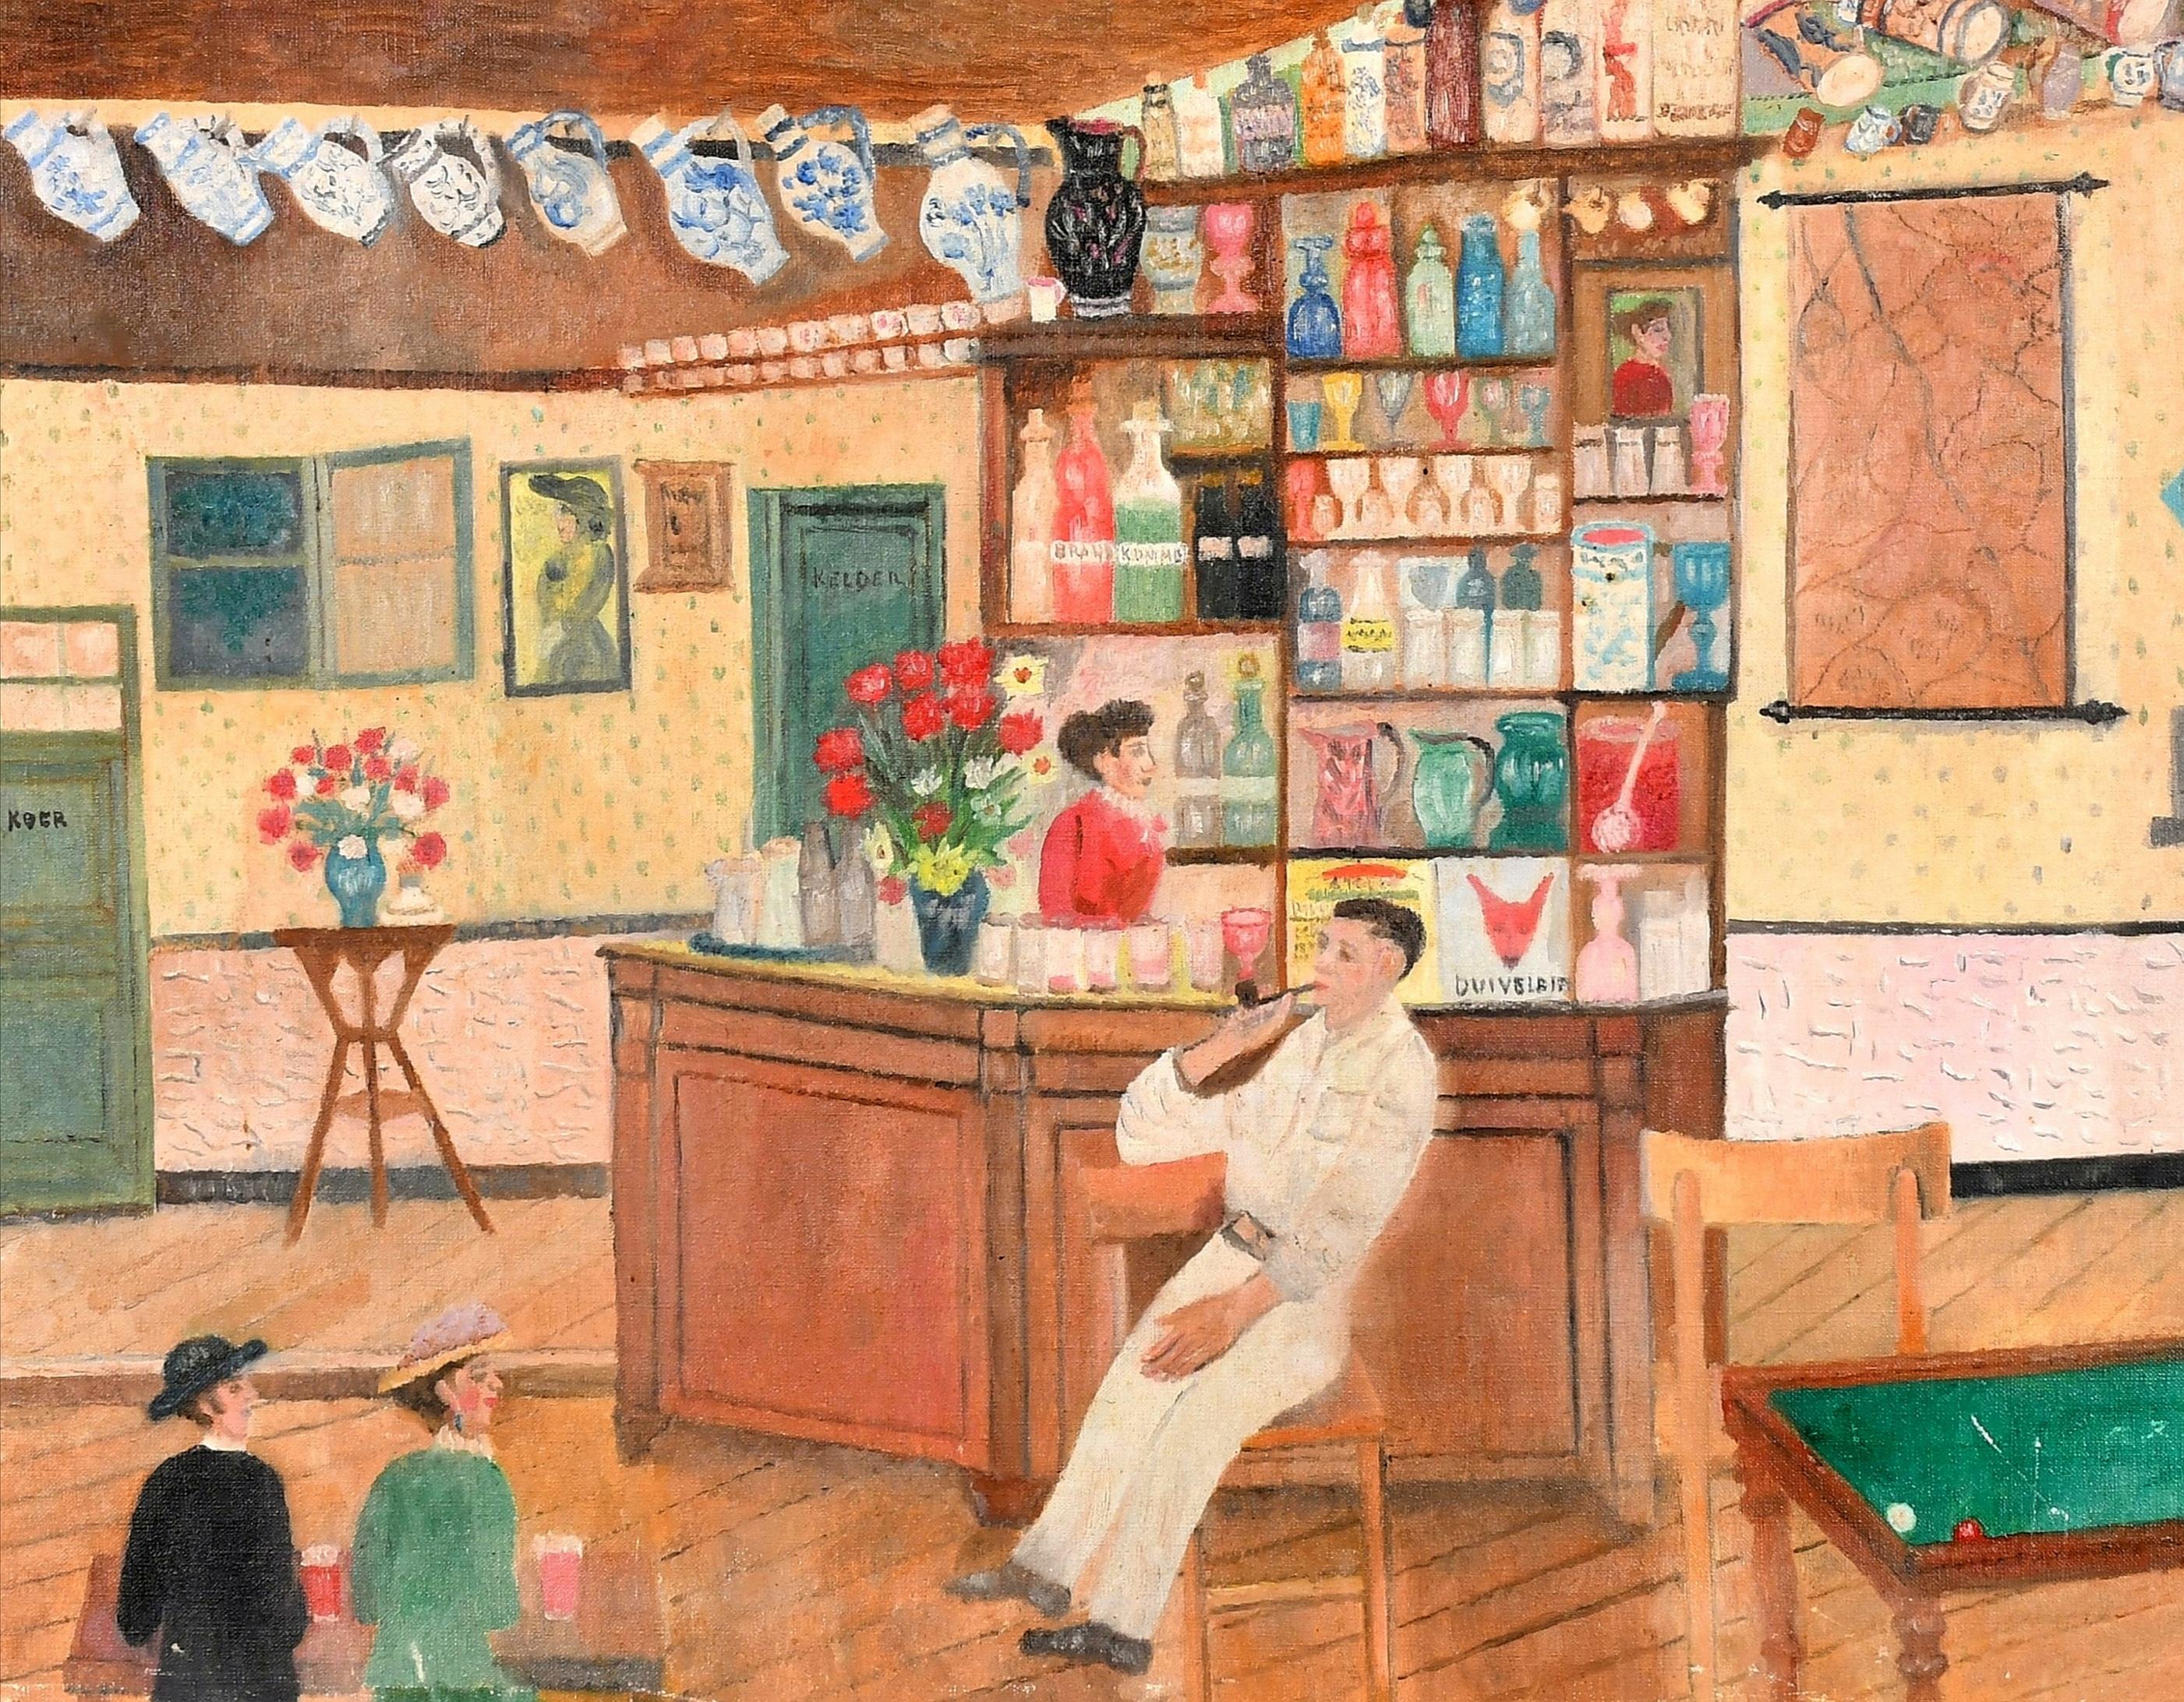 A charming 1950's Dutch naif oil on canvas depicting figures in a bar interior.  A lovely painting in very good original condition.

Artist: Dutch School, mid 20th century
Title: The Bar
Medium: Oil on canvas
Size: 20 x 24 inches (51 x 61 cm)